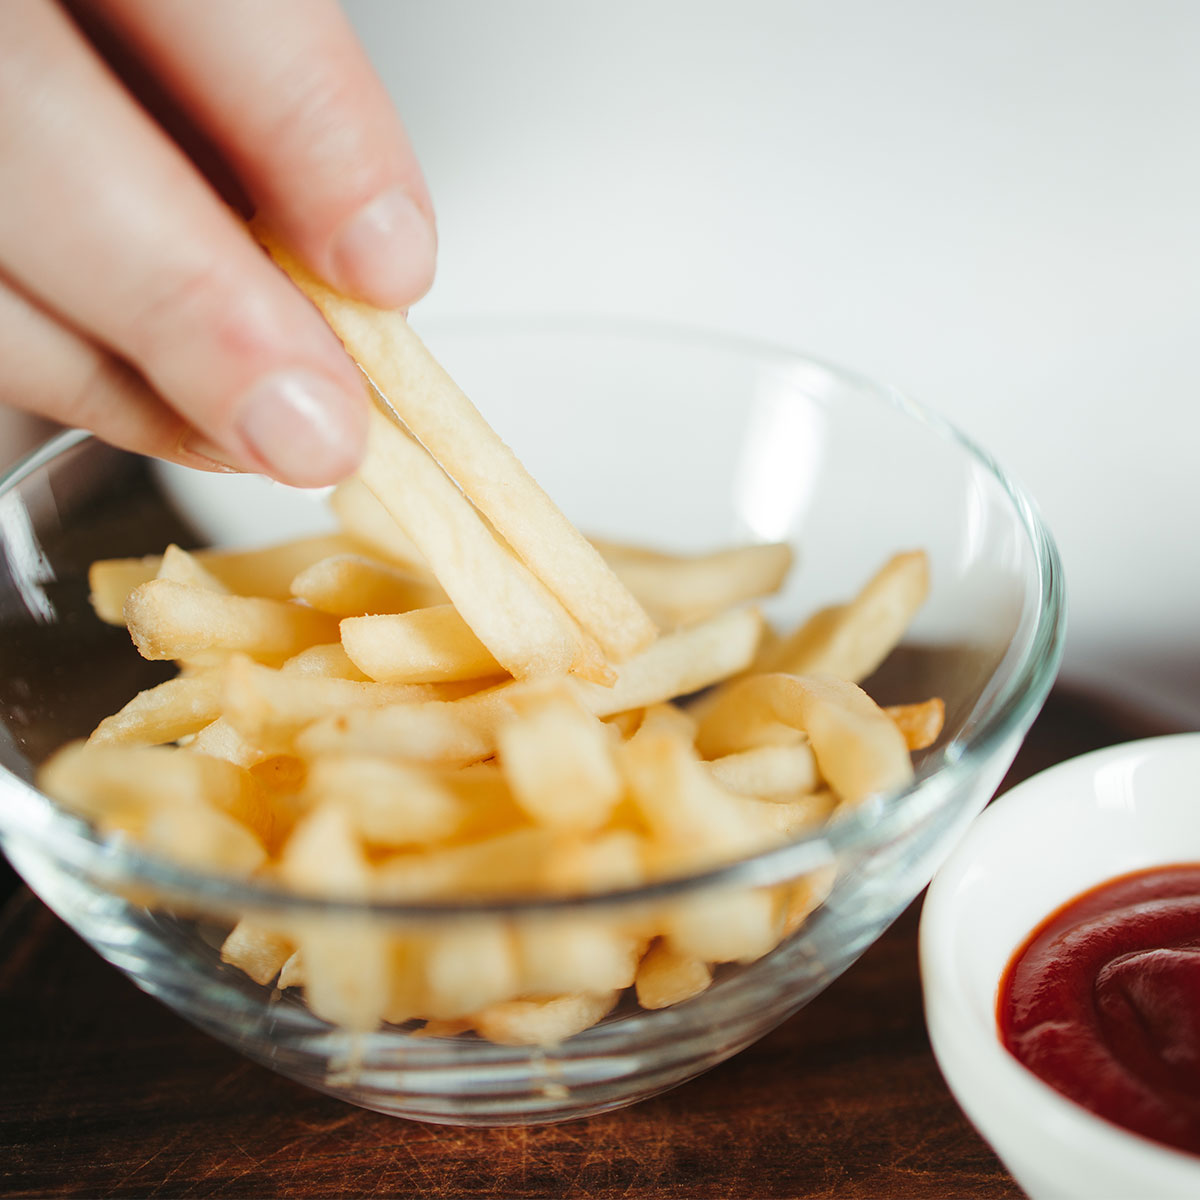 small bowl of french fries besides small bowl of ketchup